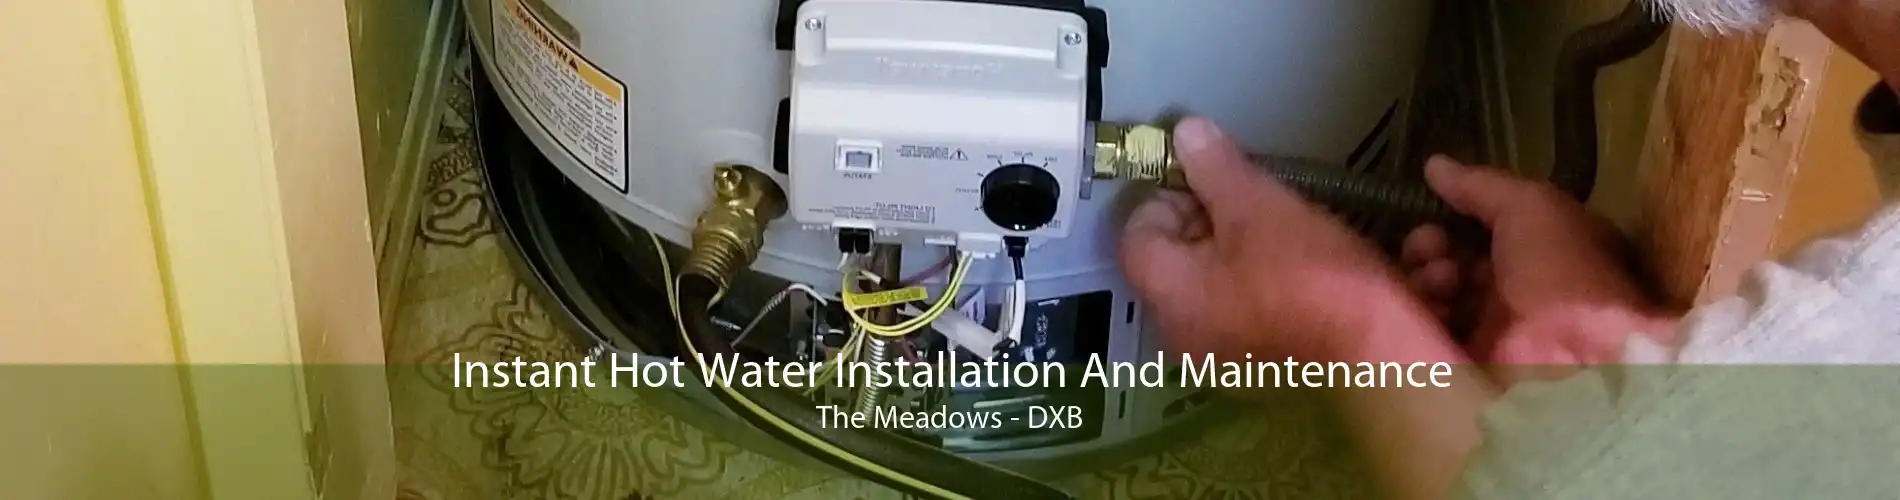 Instant Hot Water Installation And Maintenance The Meadows - DXB